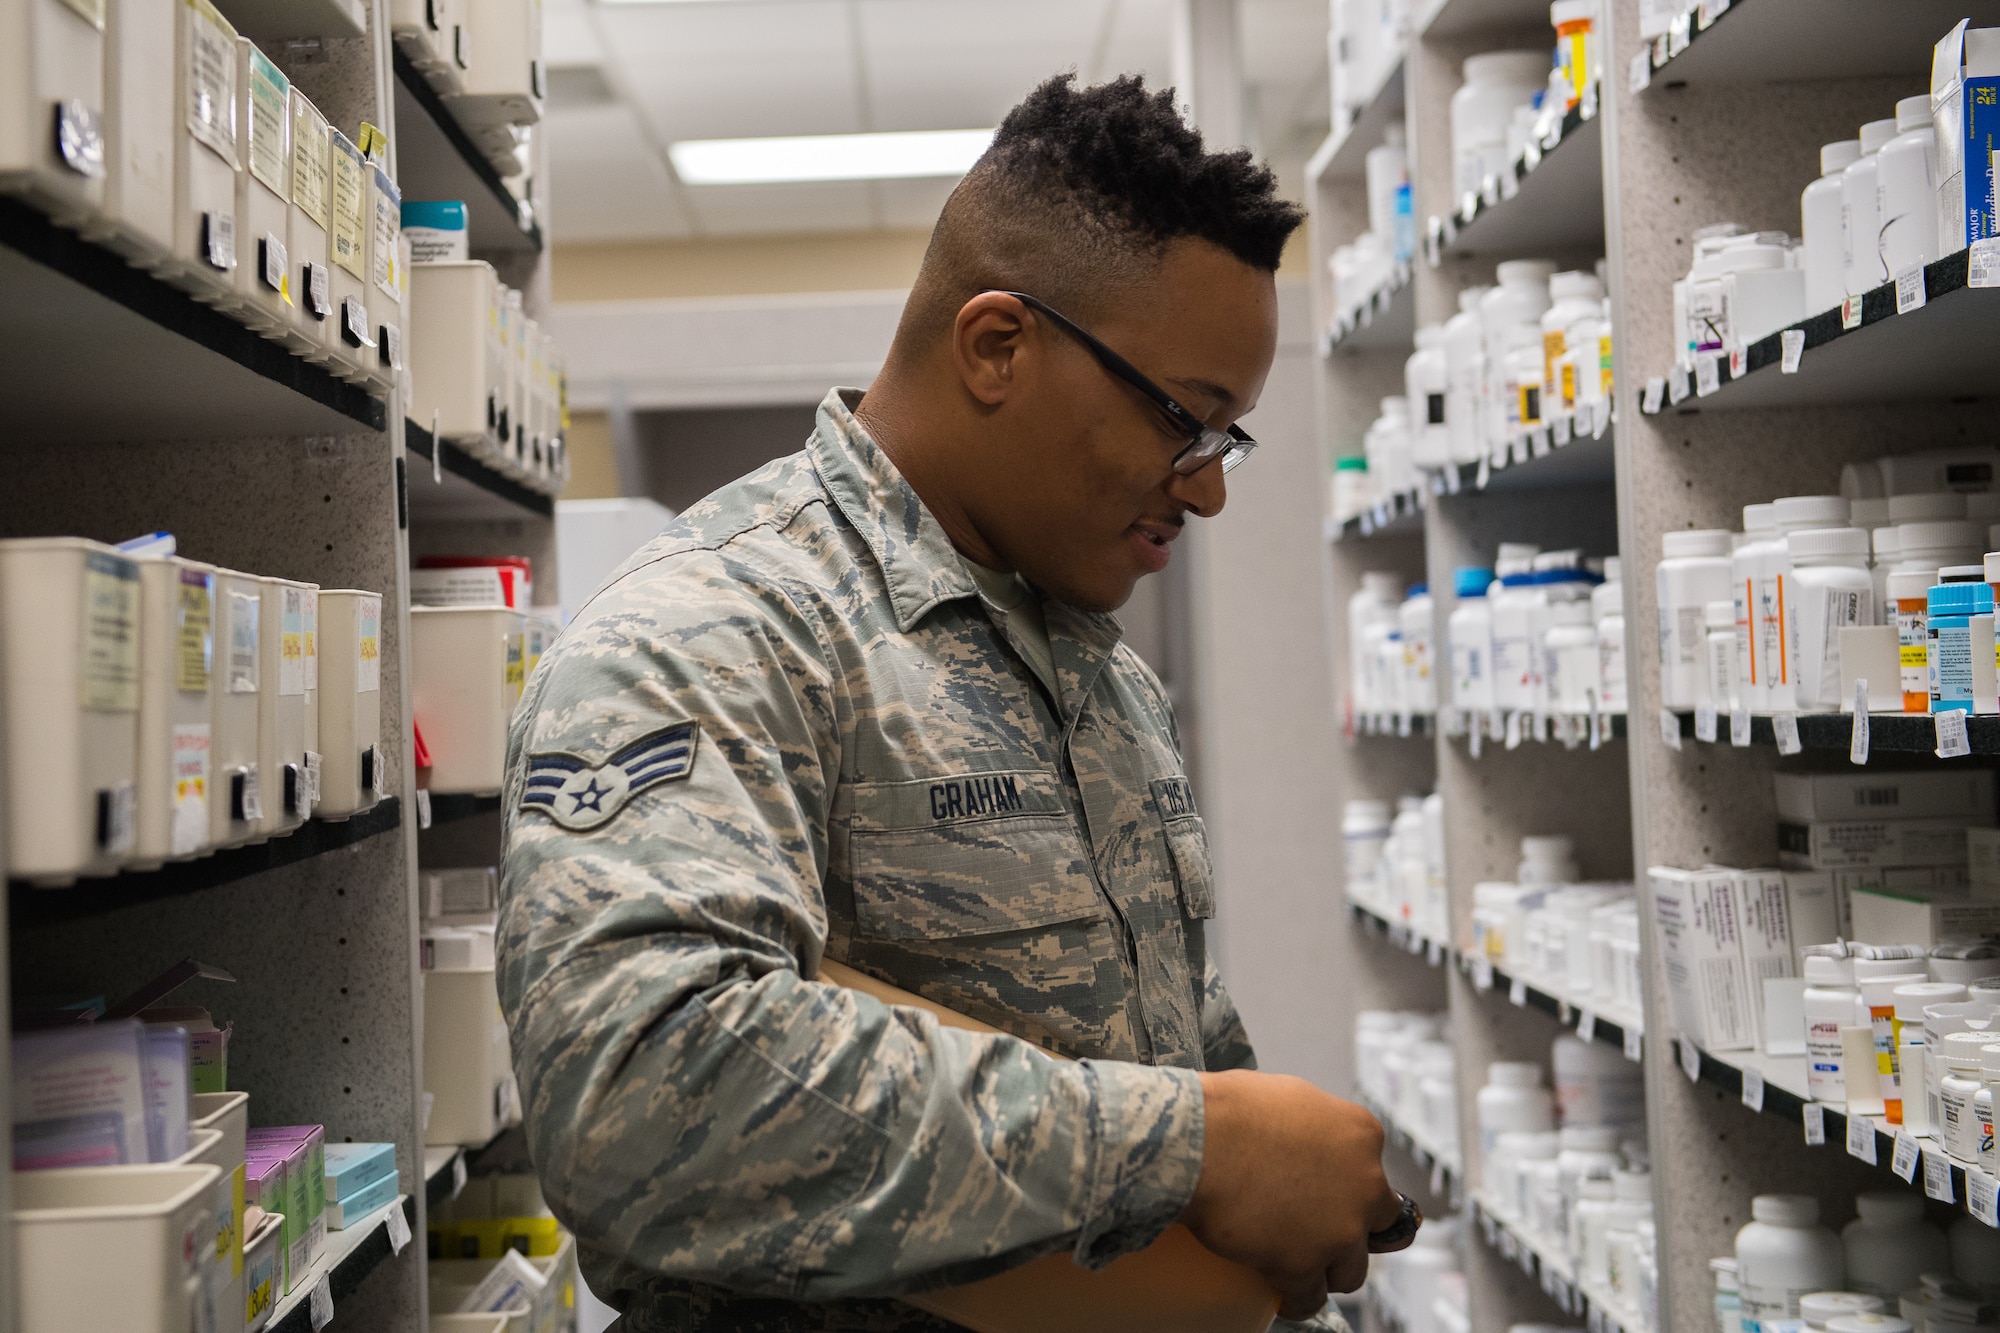 Senior Airman Franklin Graham, 2nd Medical Group Satellite Pharmacy technician, restocks shelves at Barksdale Air Force Base, La., Feb. 5, 2019. The pharmacy process 300 to 400 new prescriptions and 400 to 500 refills every day. (U.S. Air Force photo by Senior Airman Cassandra Johnson)